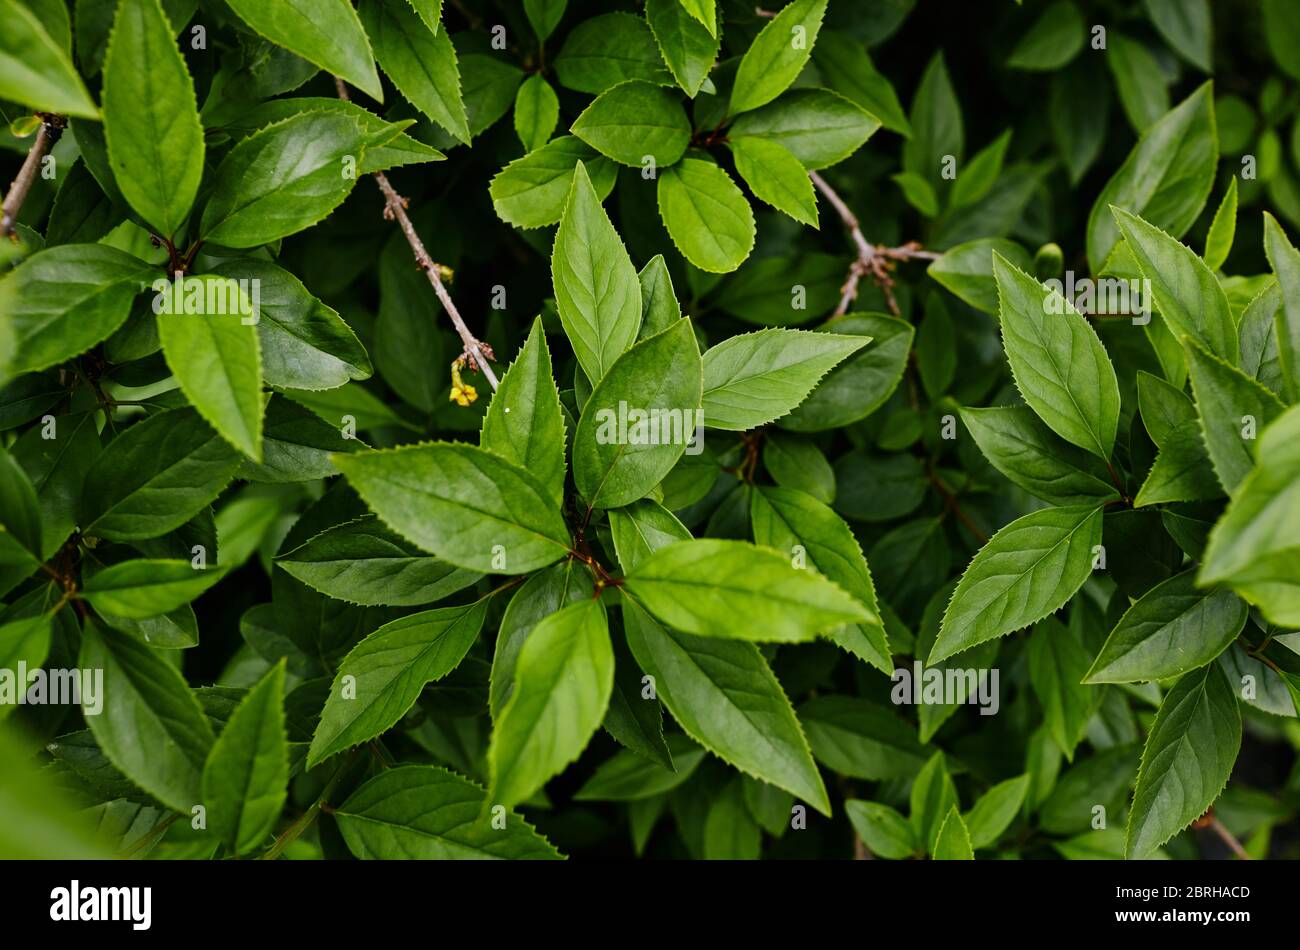 Forsythia branch with green leaves on a sunny day. Forsythia bush in spring. Blurred leaf background, top view Stock Photo